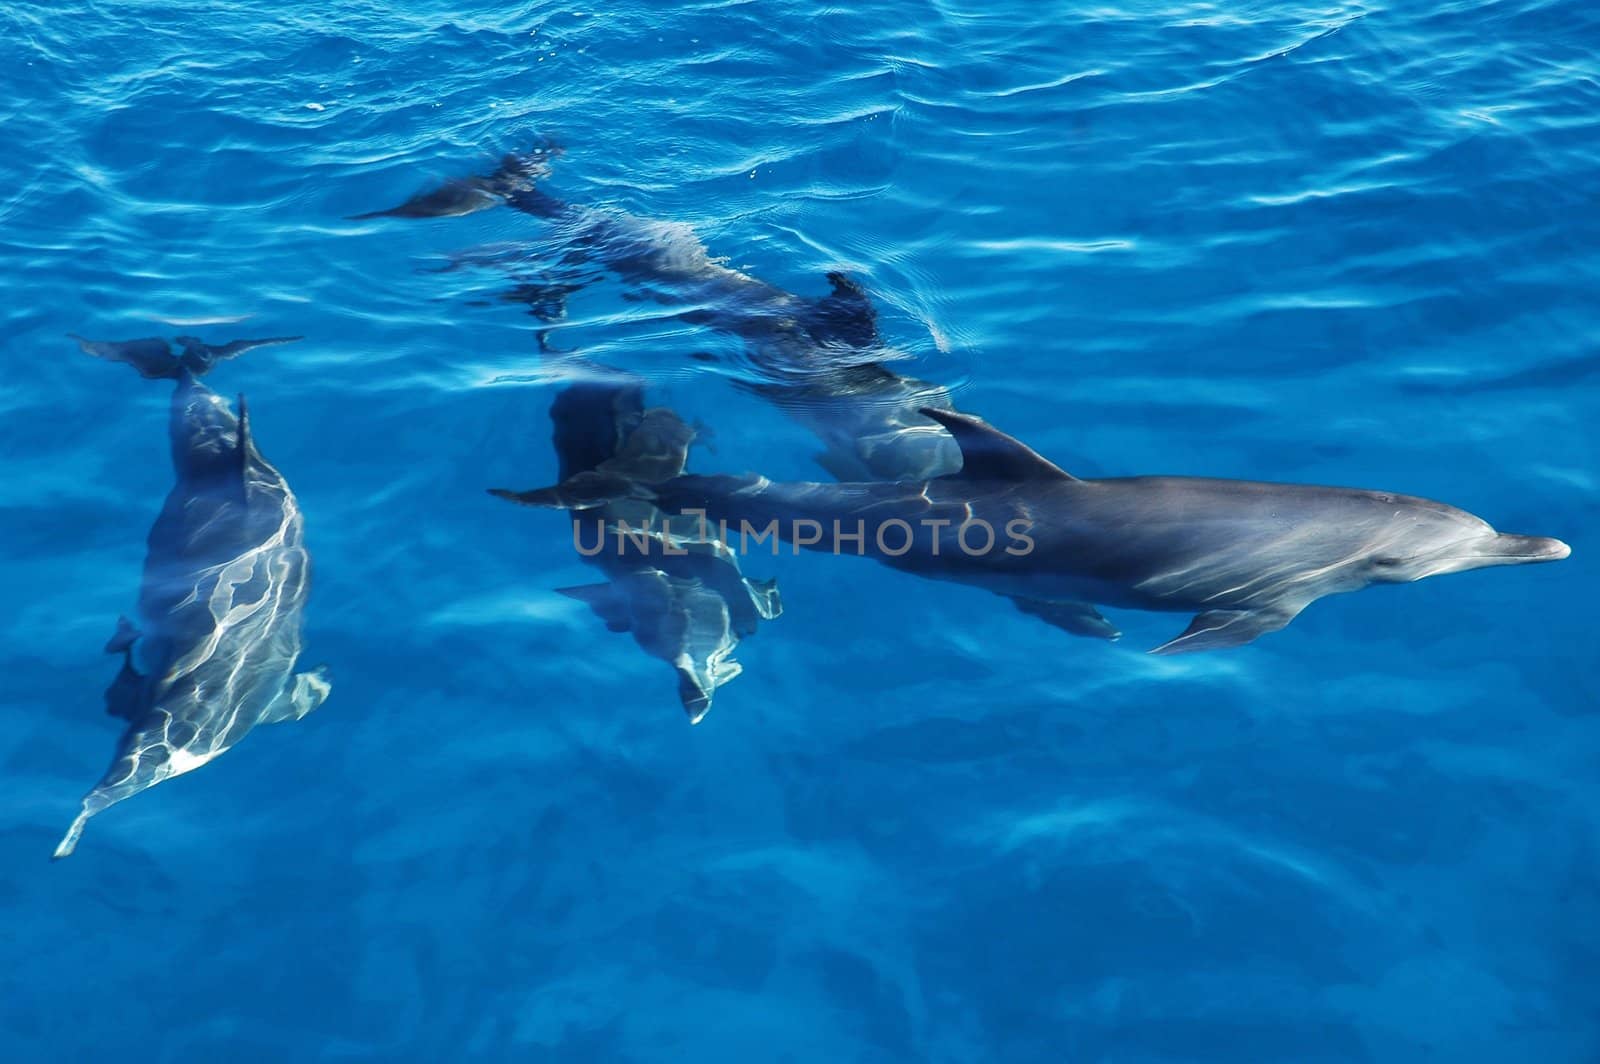 Group of dolphins in the sea by kefiiir